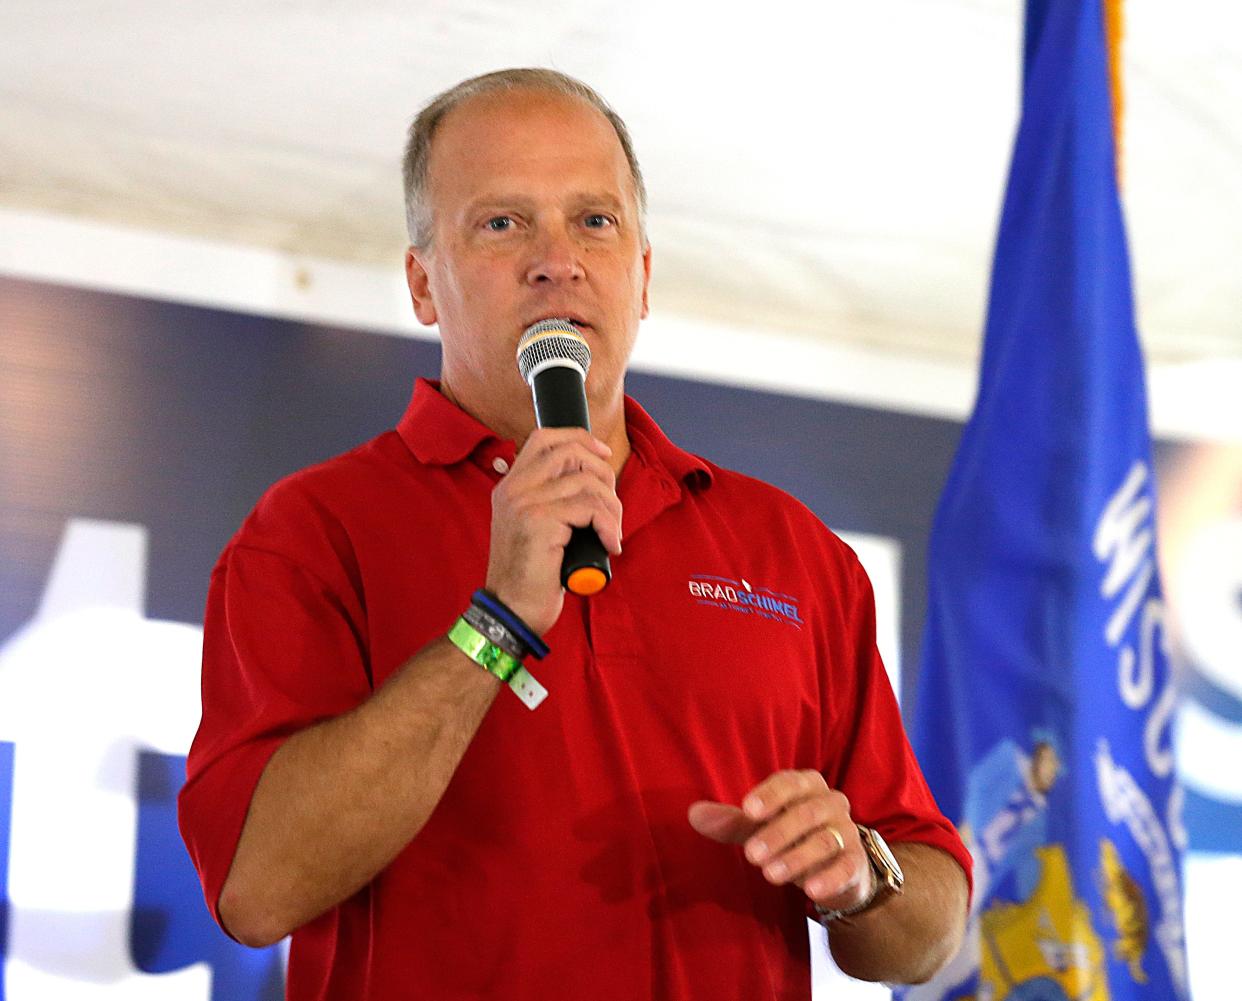 Waukesha County Circuit Judge Brad Schimel, shown here at a campaign event during his tenure as attorney general.